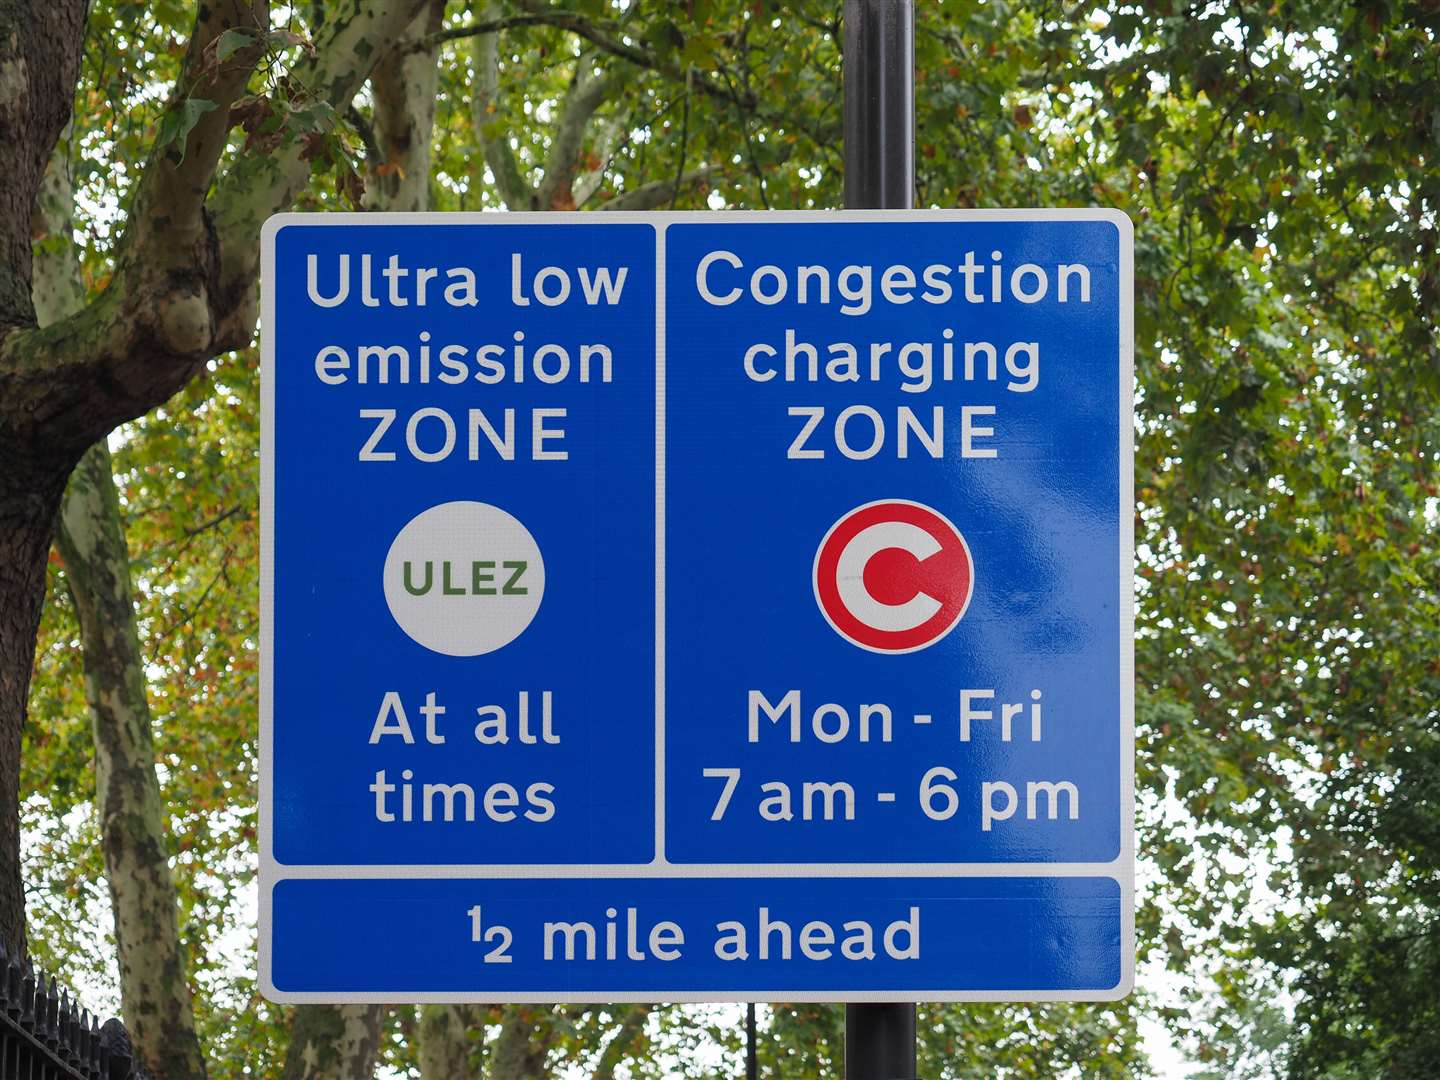 A further expansion of the Ultra low emission zone is also under consideration.